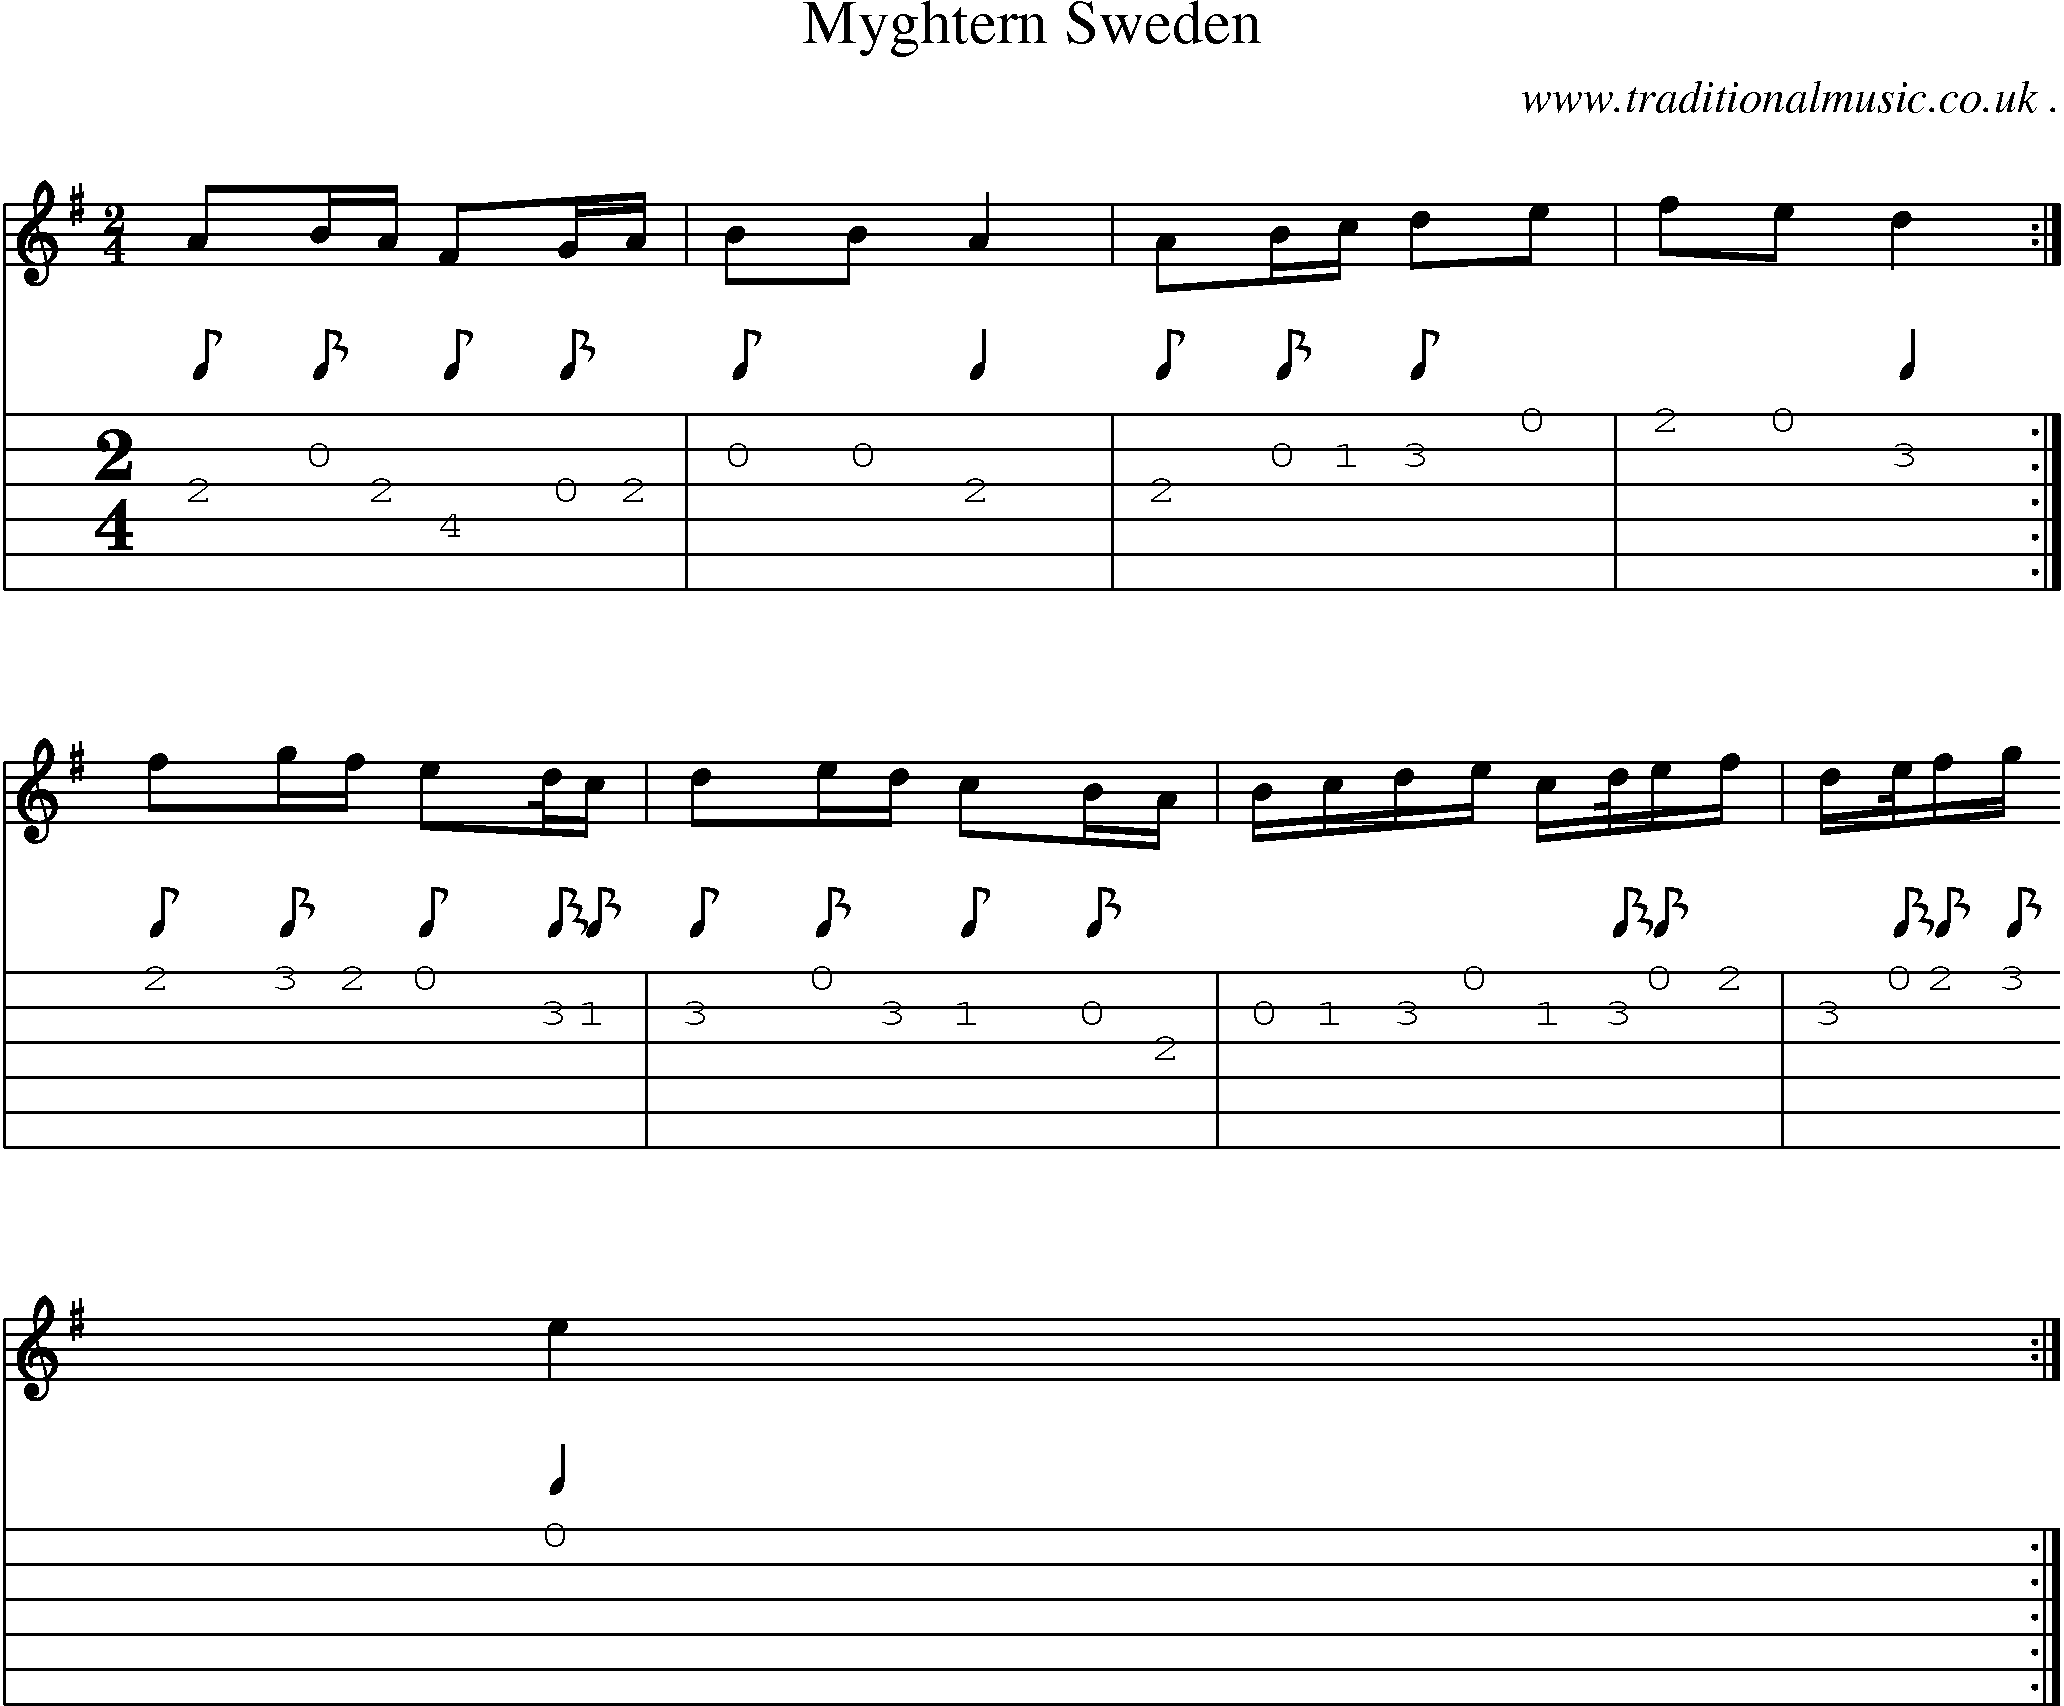 Sheet-Music and Guitar Tabs for Myghtern Sweden